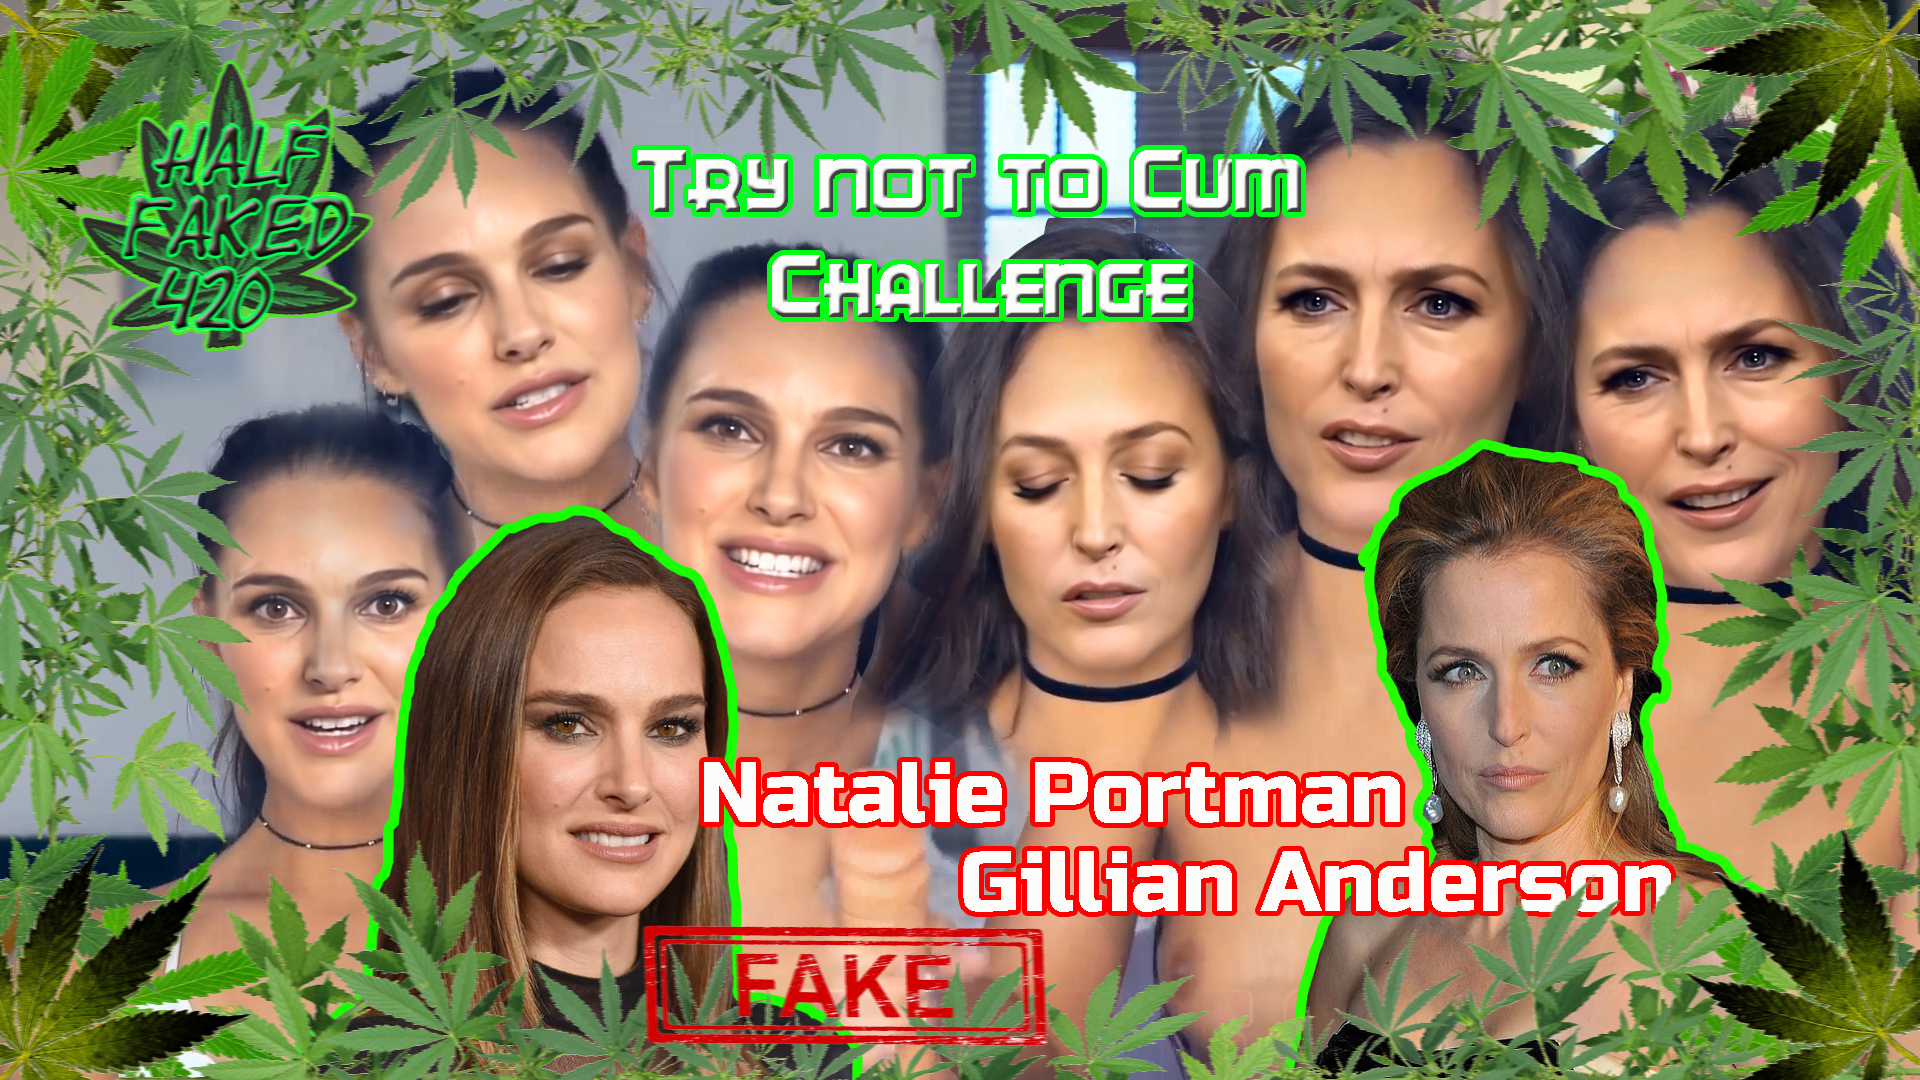 Natalie Portman & Gillian Anderson - Try not to cum challenge JOI | FAKE